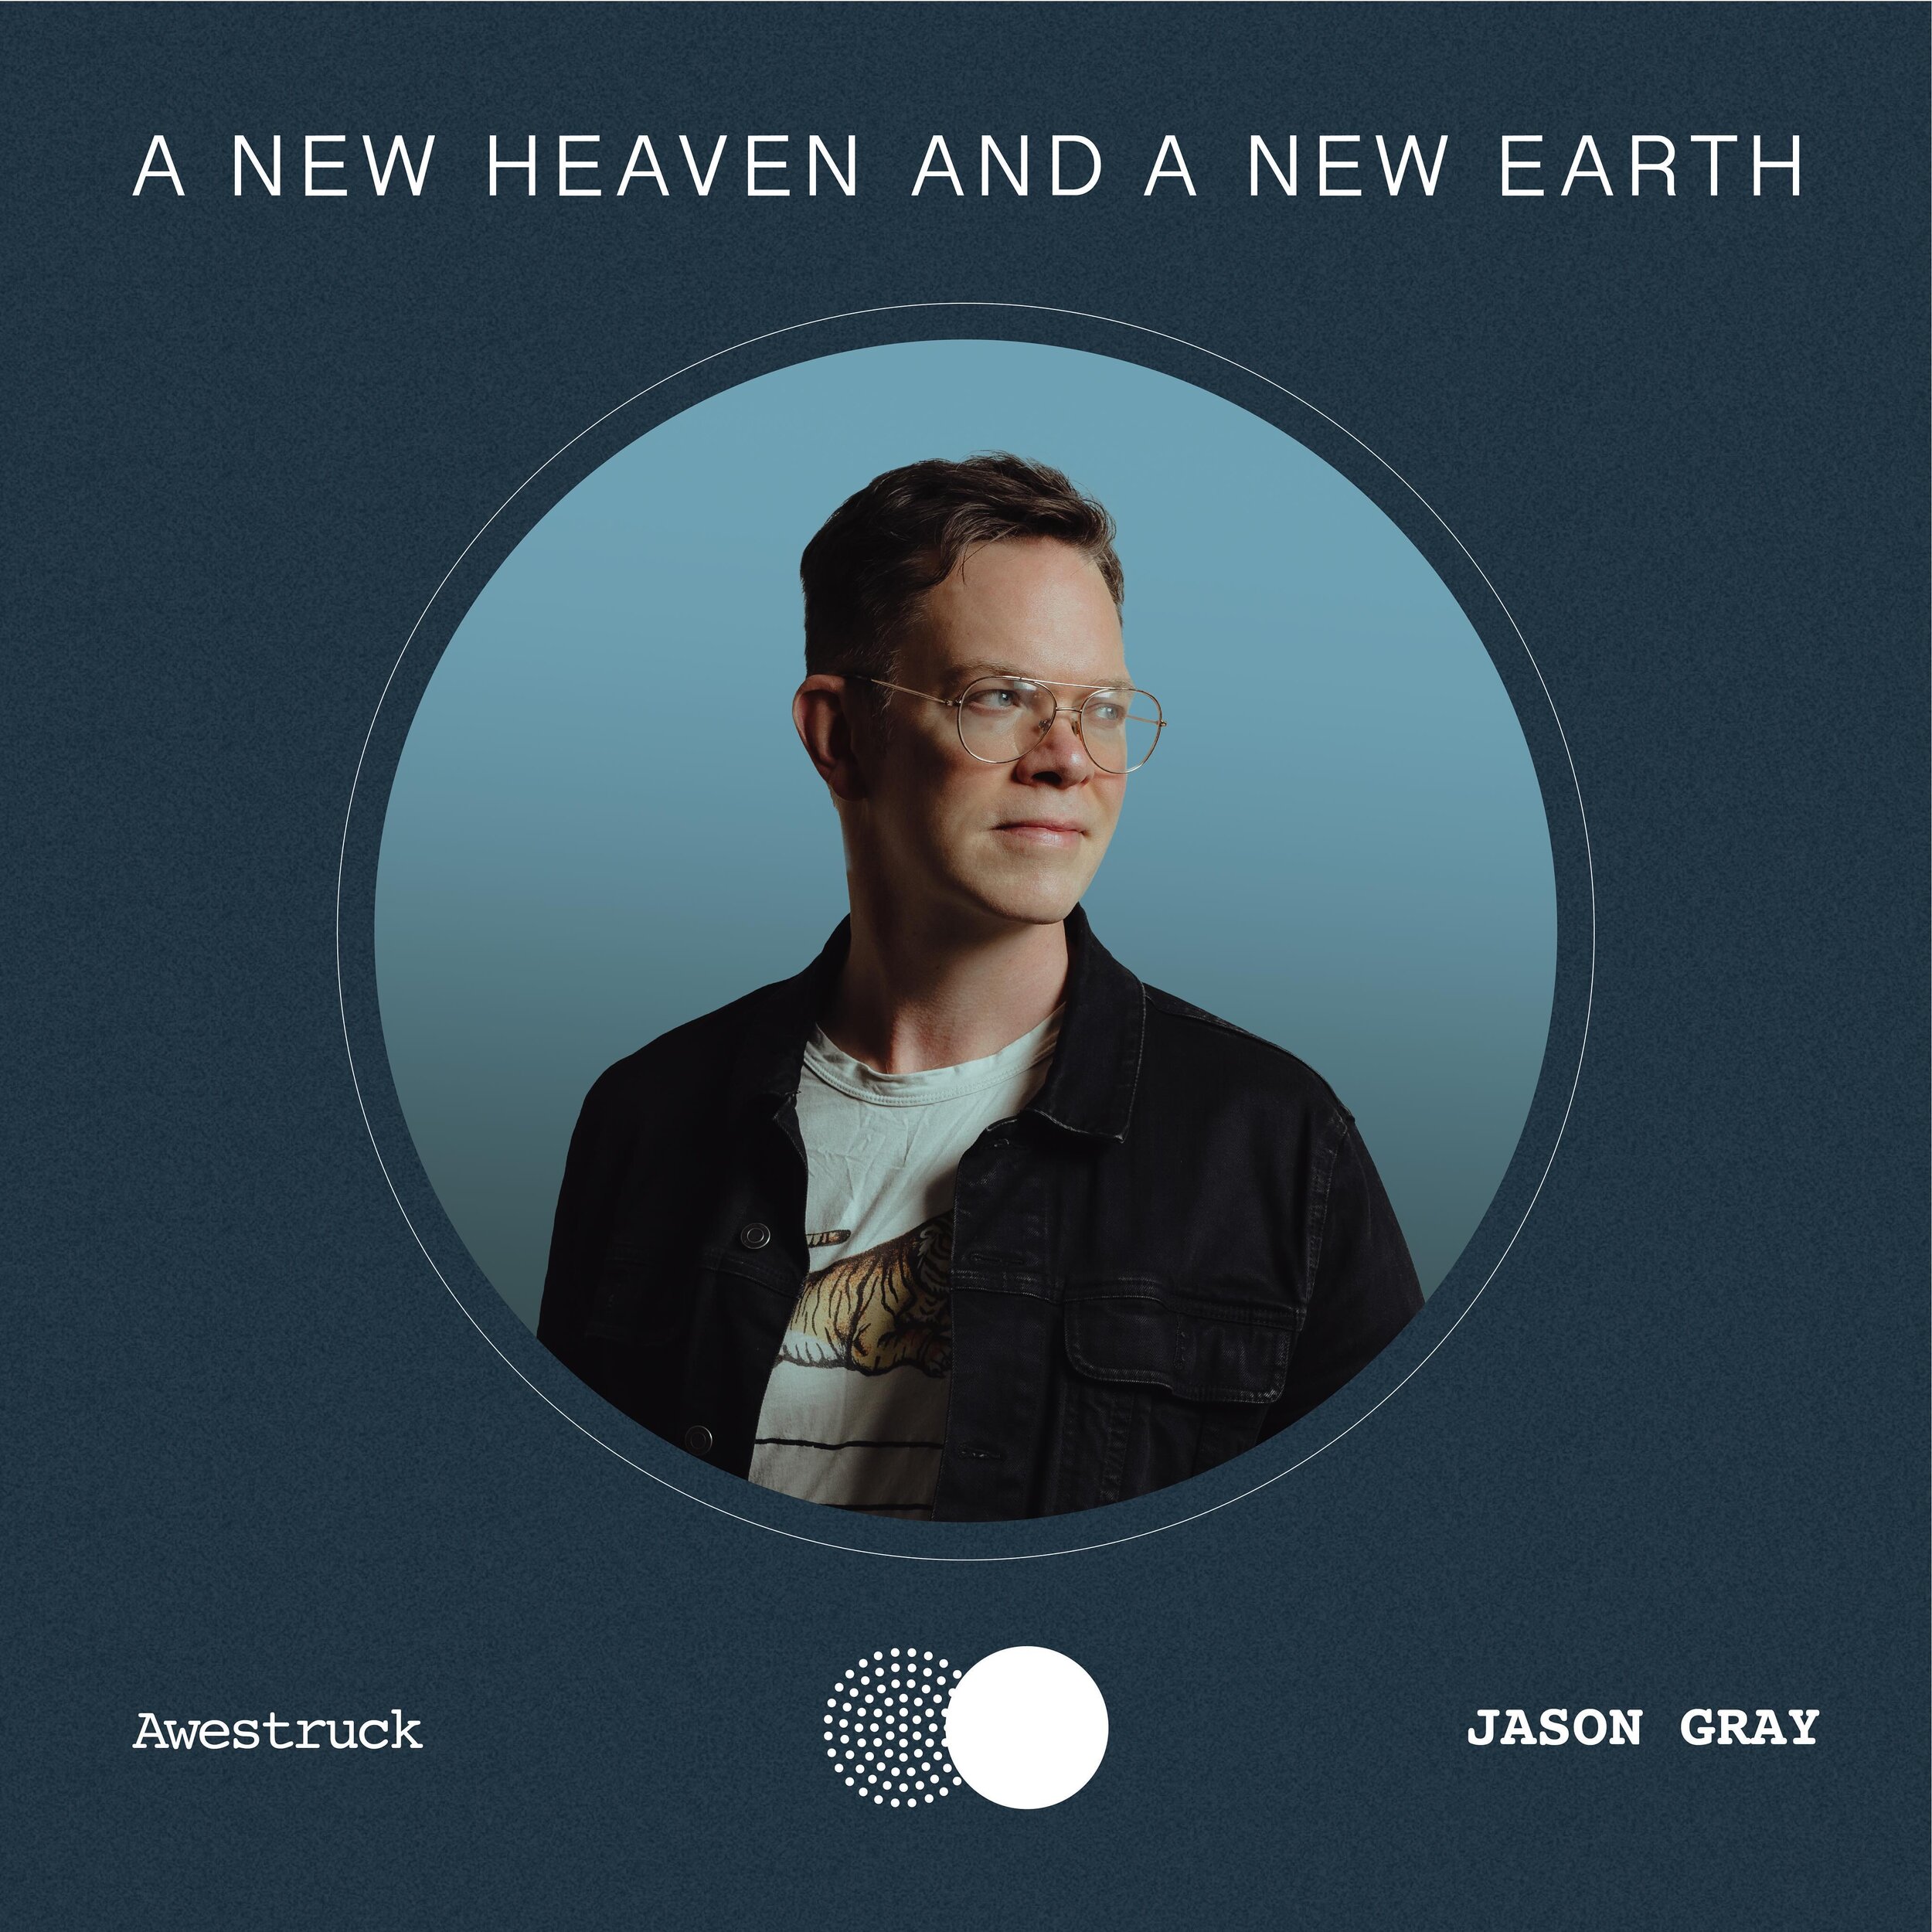 Our latest single, this time by @jasongraymusic, is out today! Listen to &ldquo;Awestruck&rdquo; in all the usual places.